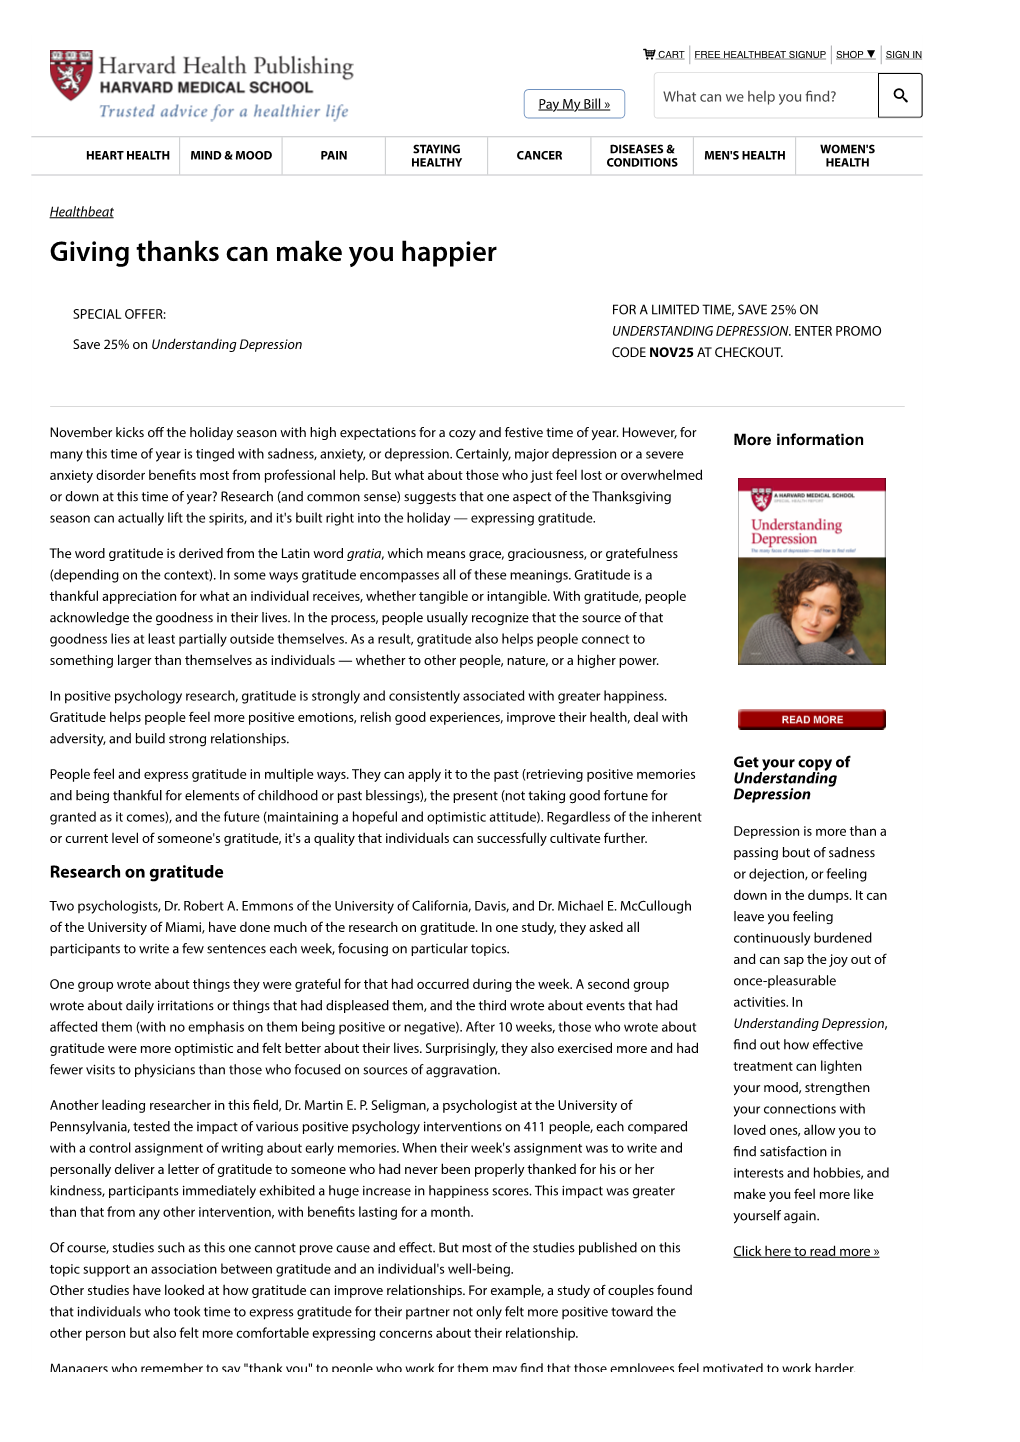 Giving Thanks Can Make You Happier